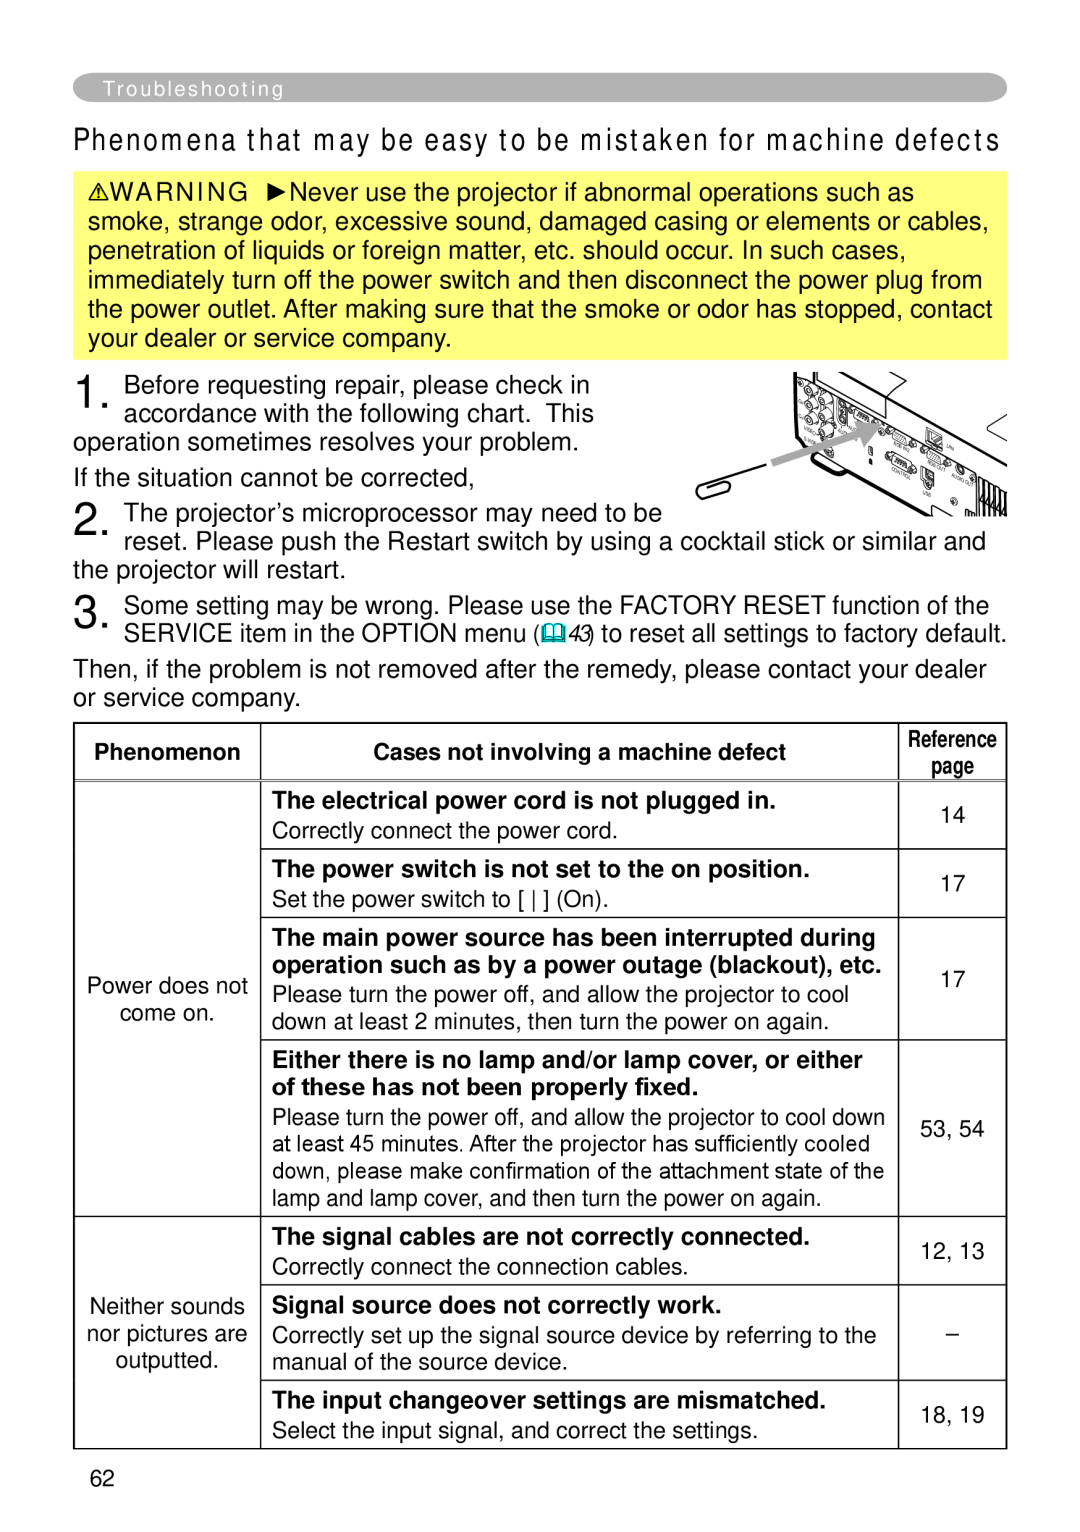 Hitachi CP-X265 user manual The electrical power cord is not plugged in, The power switch is not set to the on position 